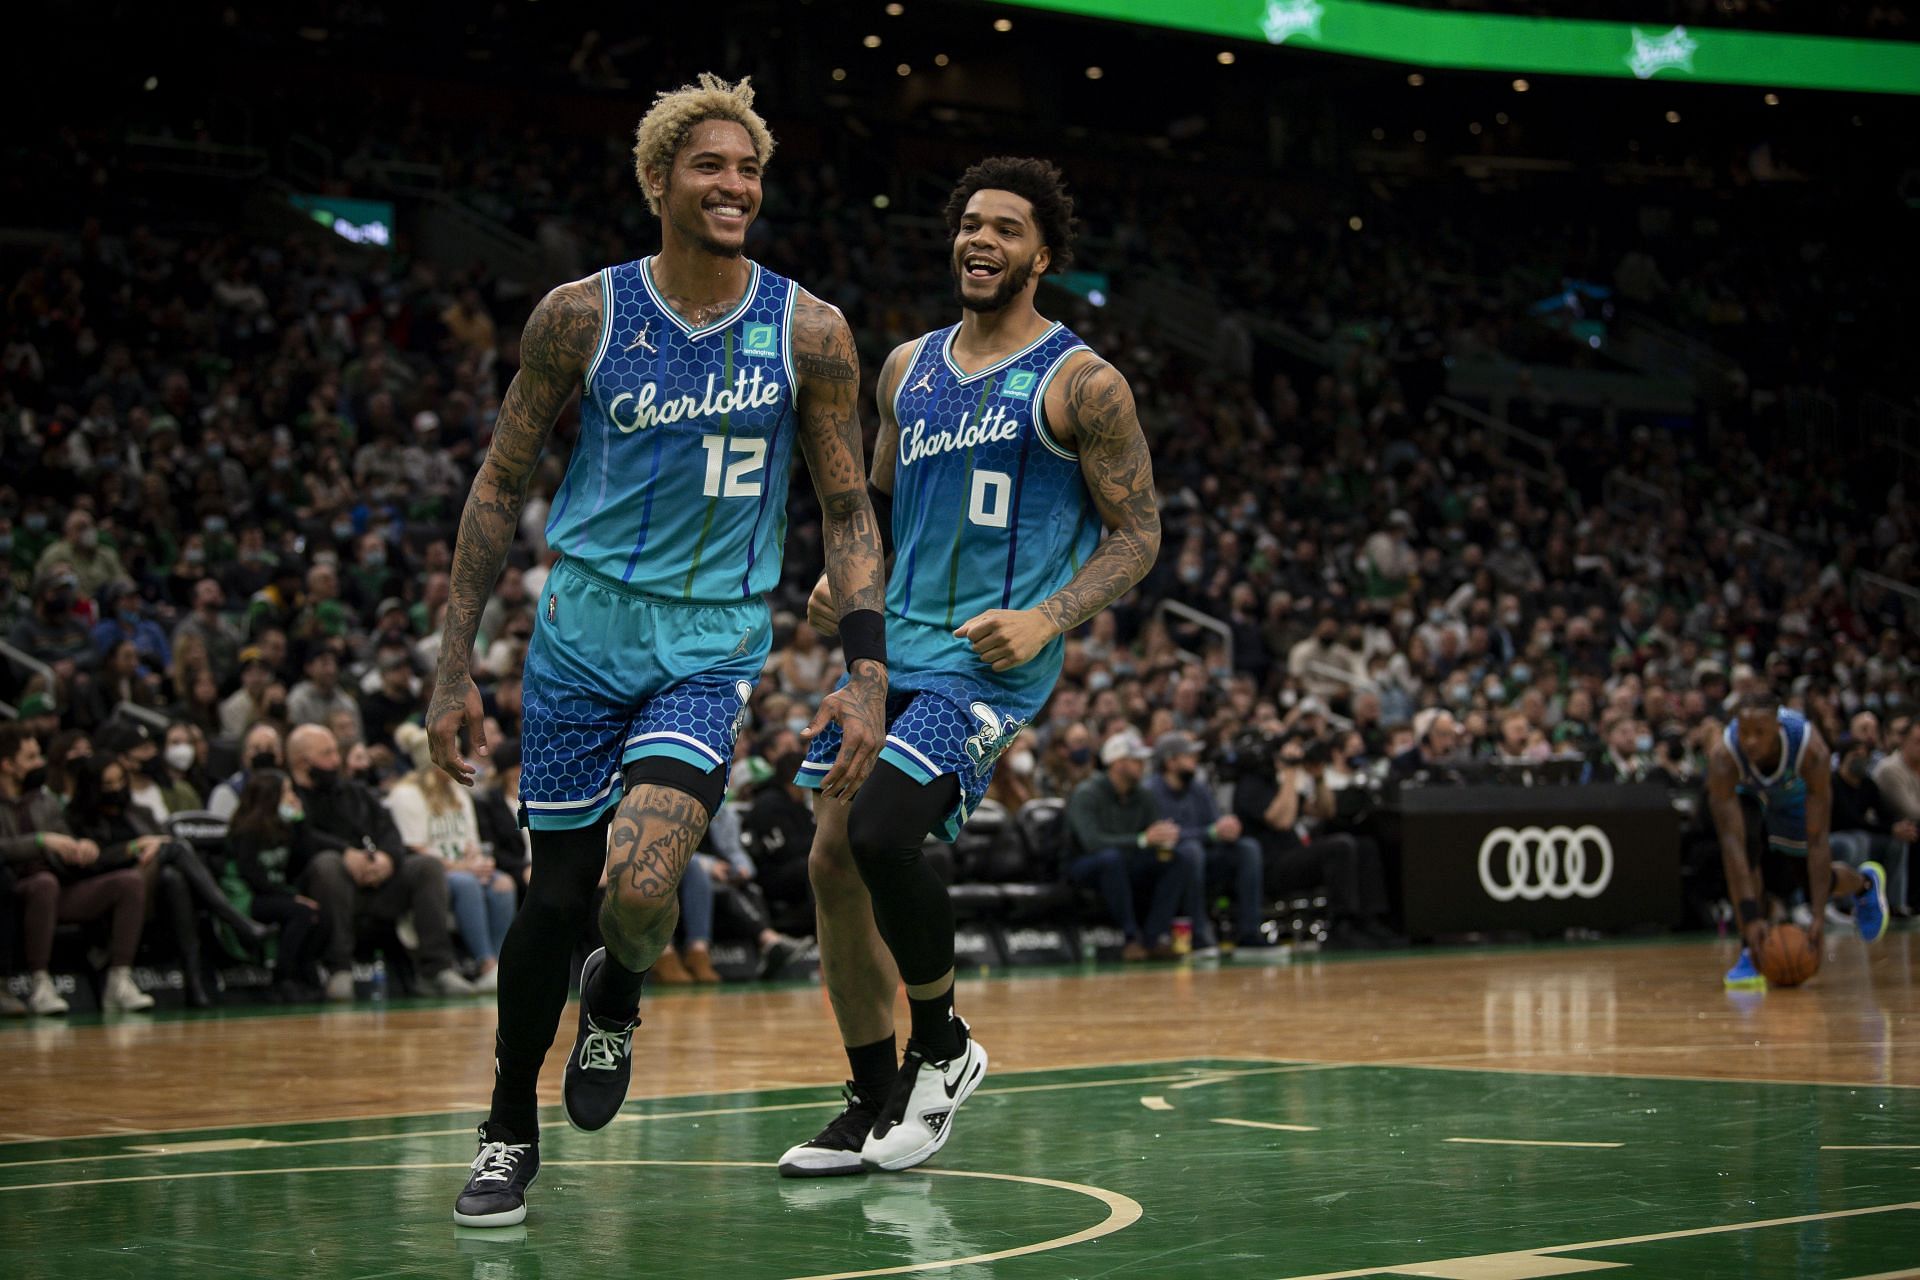 Charlotte Hornets wing Kelly Oubre Jr has been buzzing in the Sixth Man of the Year race.